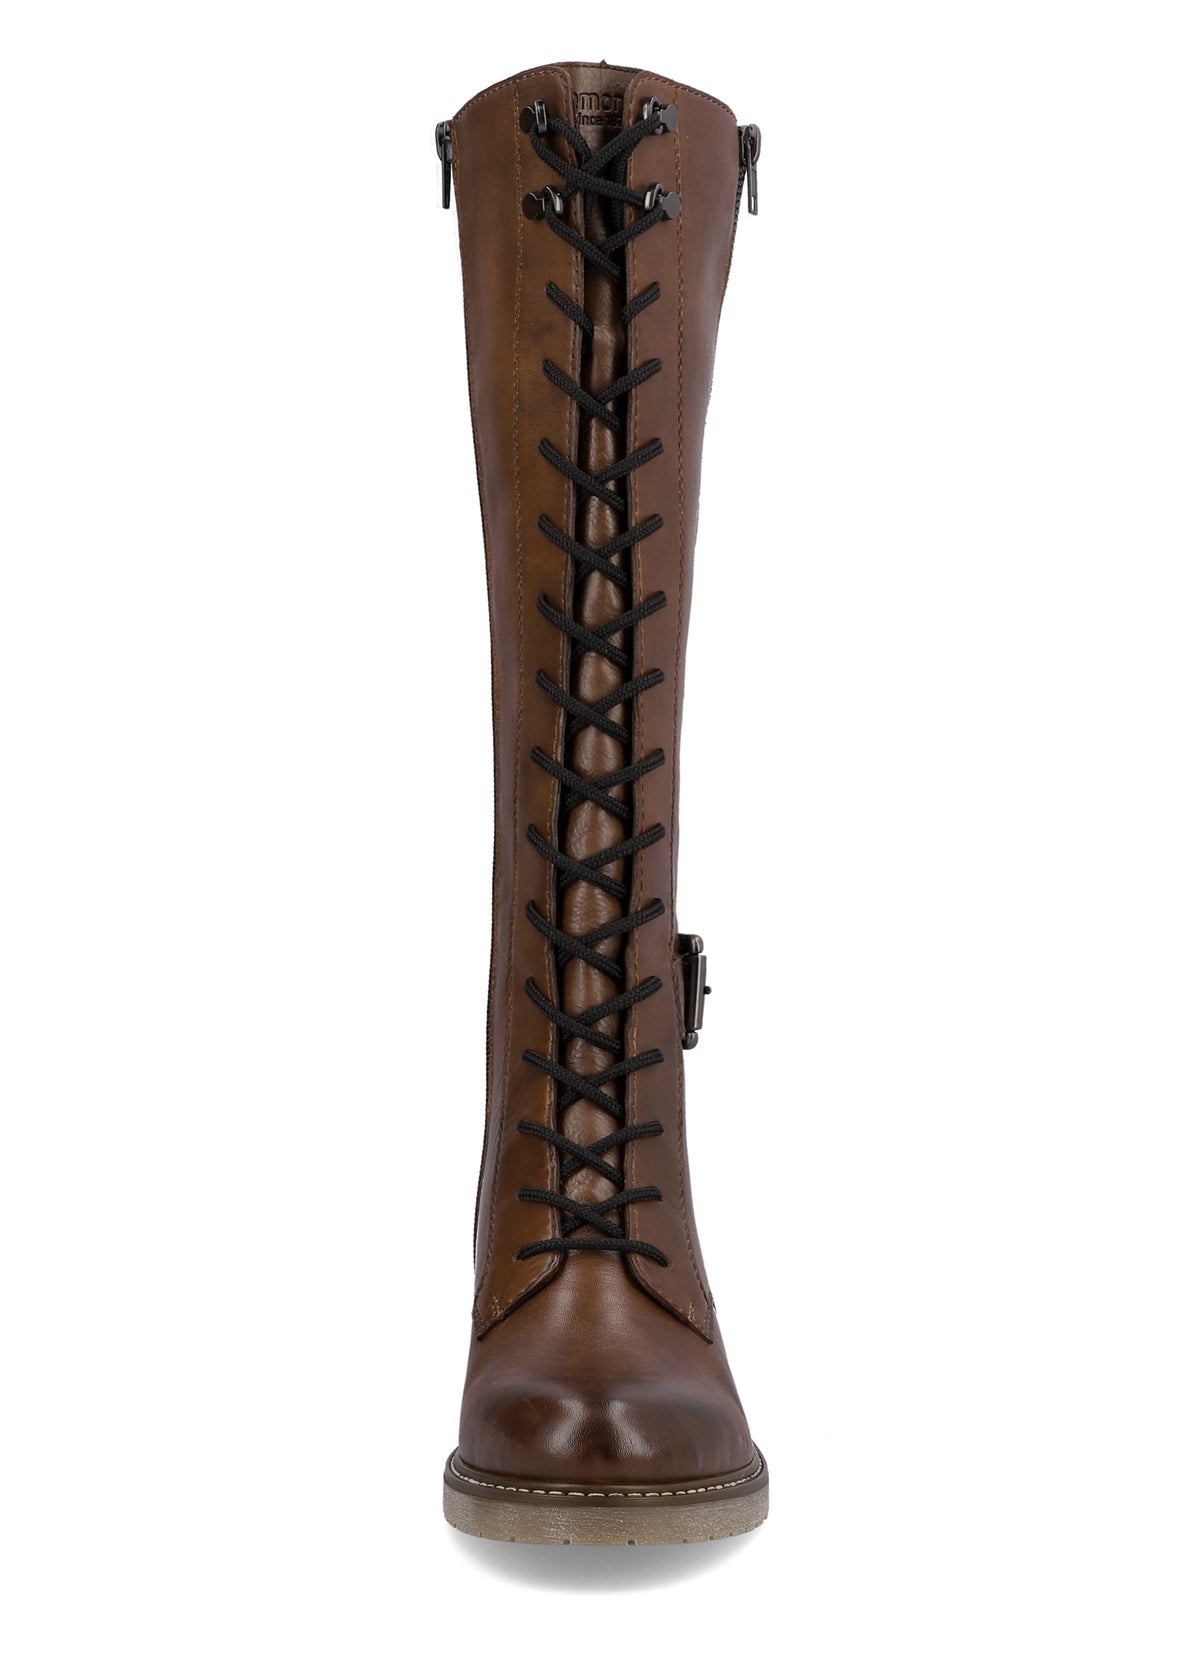 Boots with a low stiletto heel - brown, laces, SM shaft